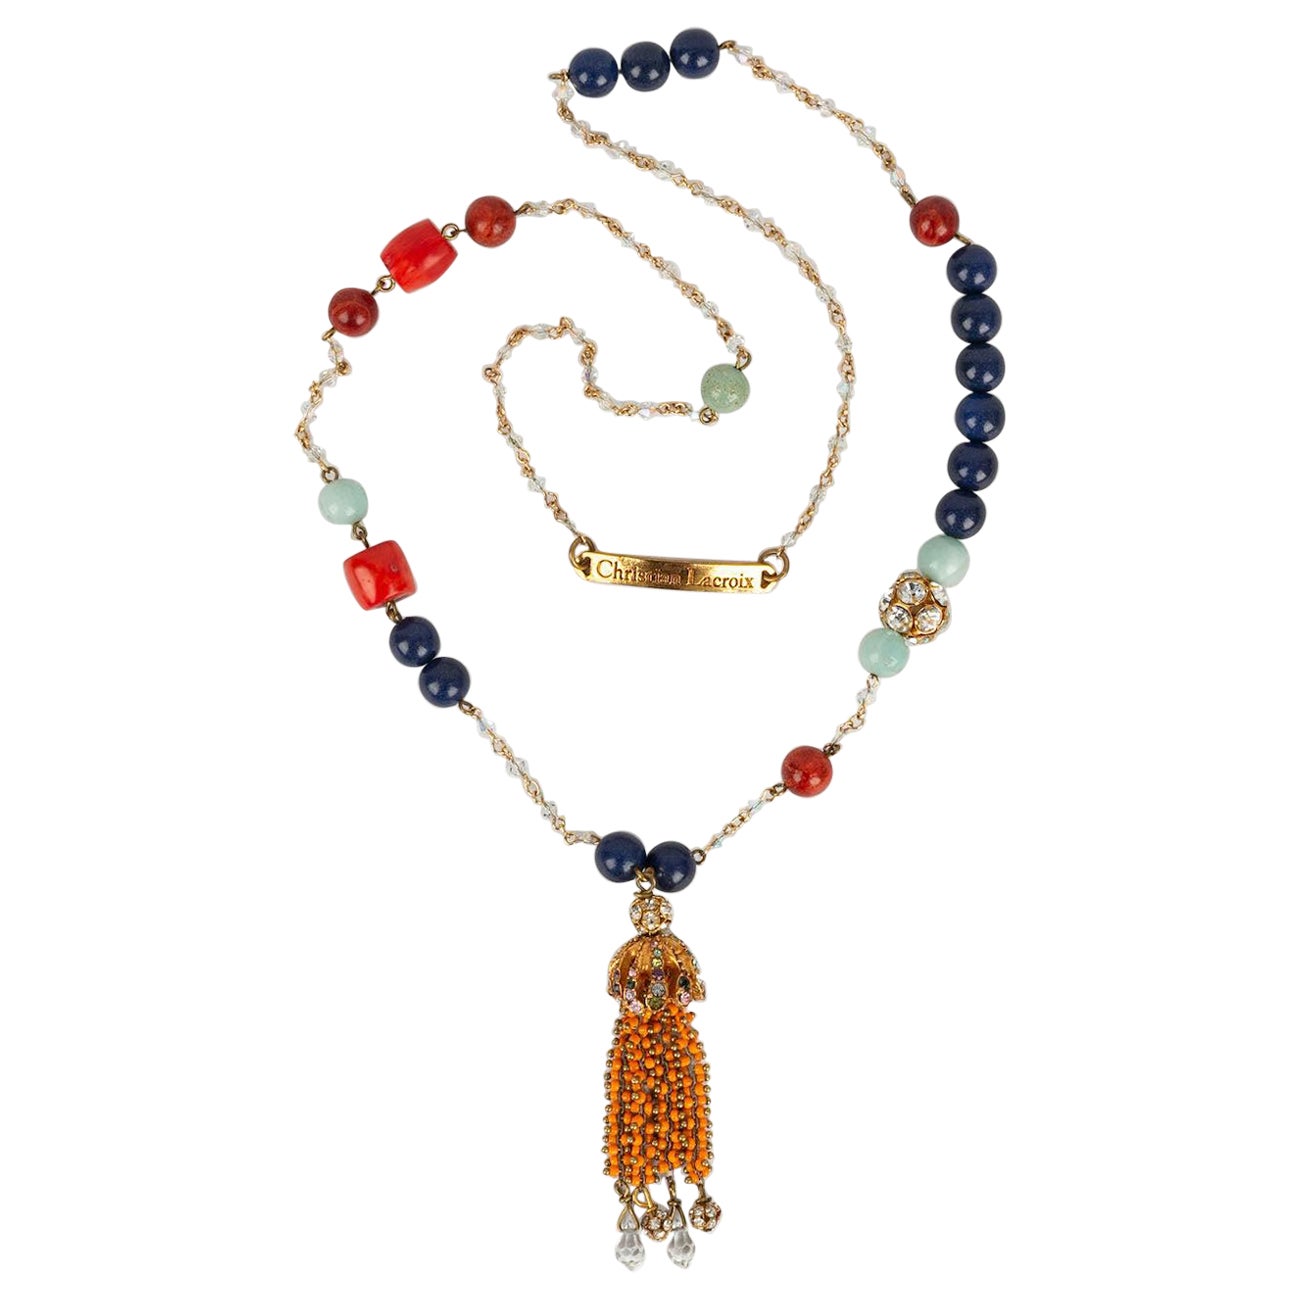 Christian Lacroix Long Necklace with Multicolored Pearls